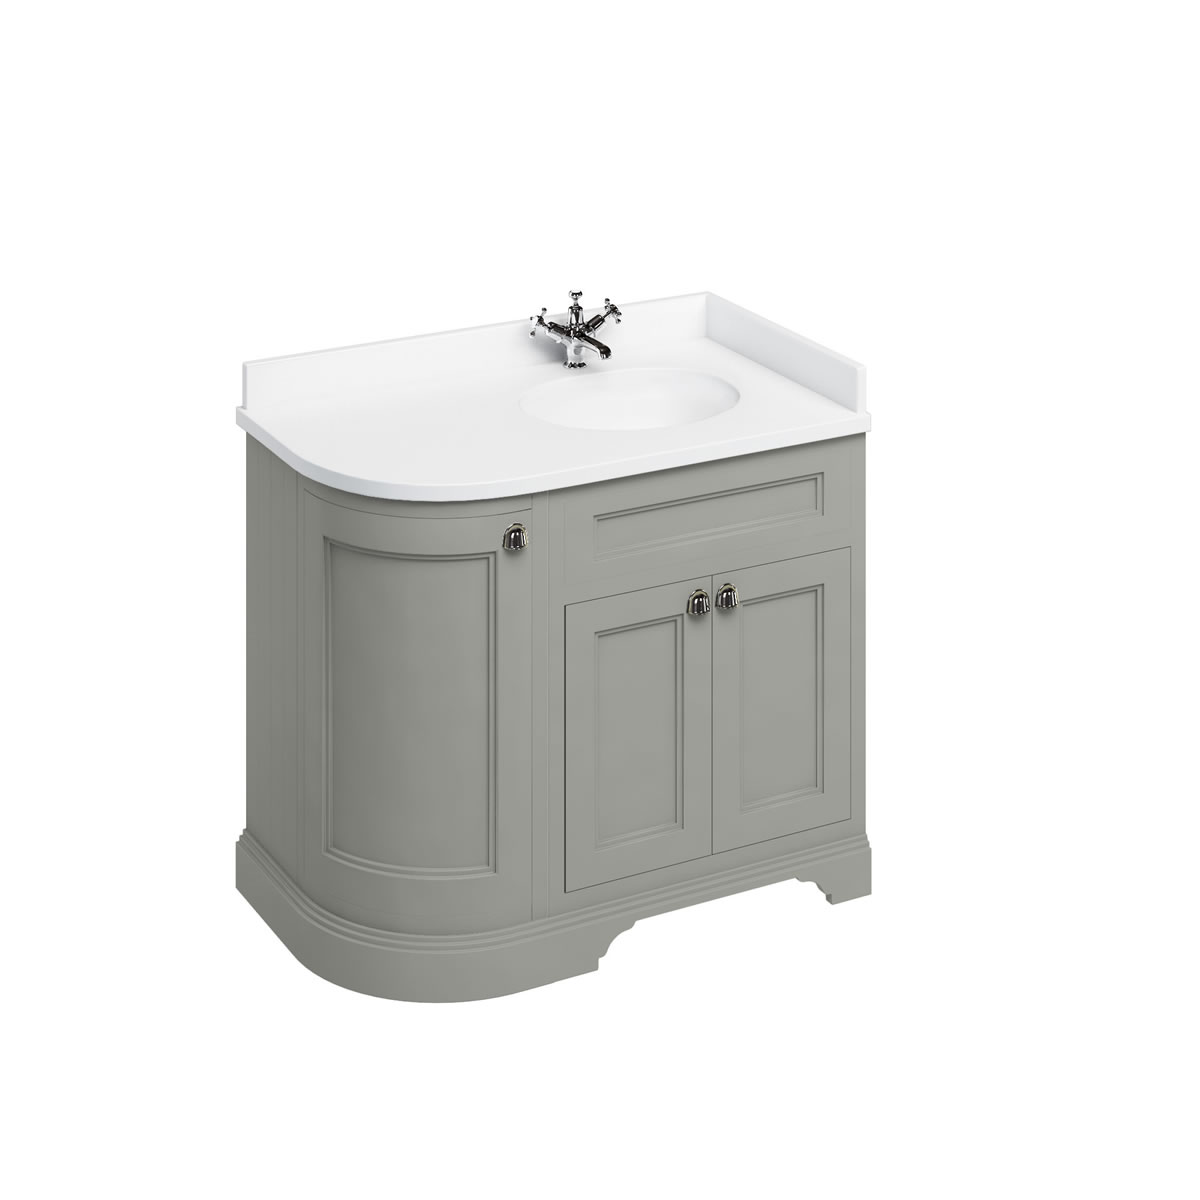 Freestanding 100 Curved Corner Vanity Unit Right Hand - Dark Olive and Minerva white worktop with integrated white basin